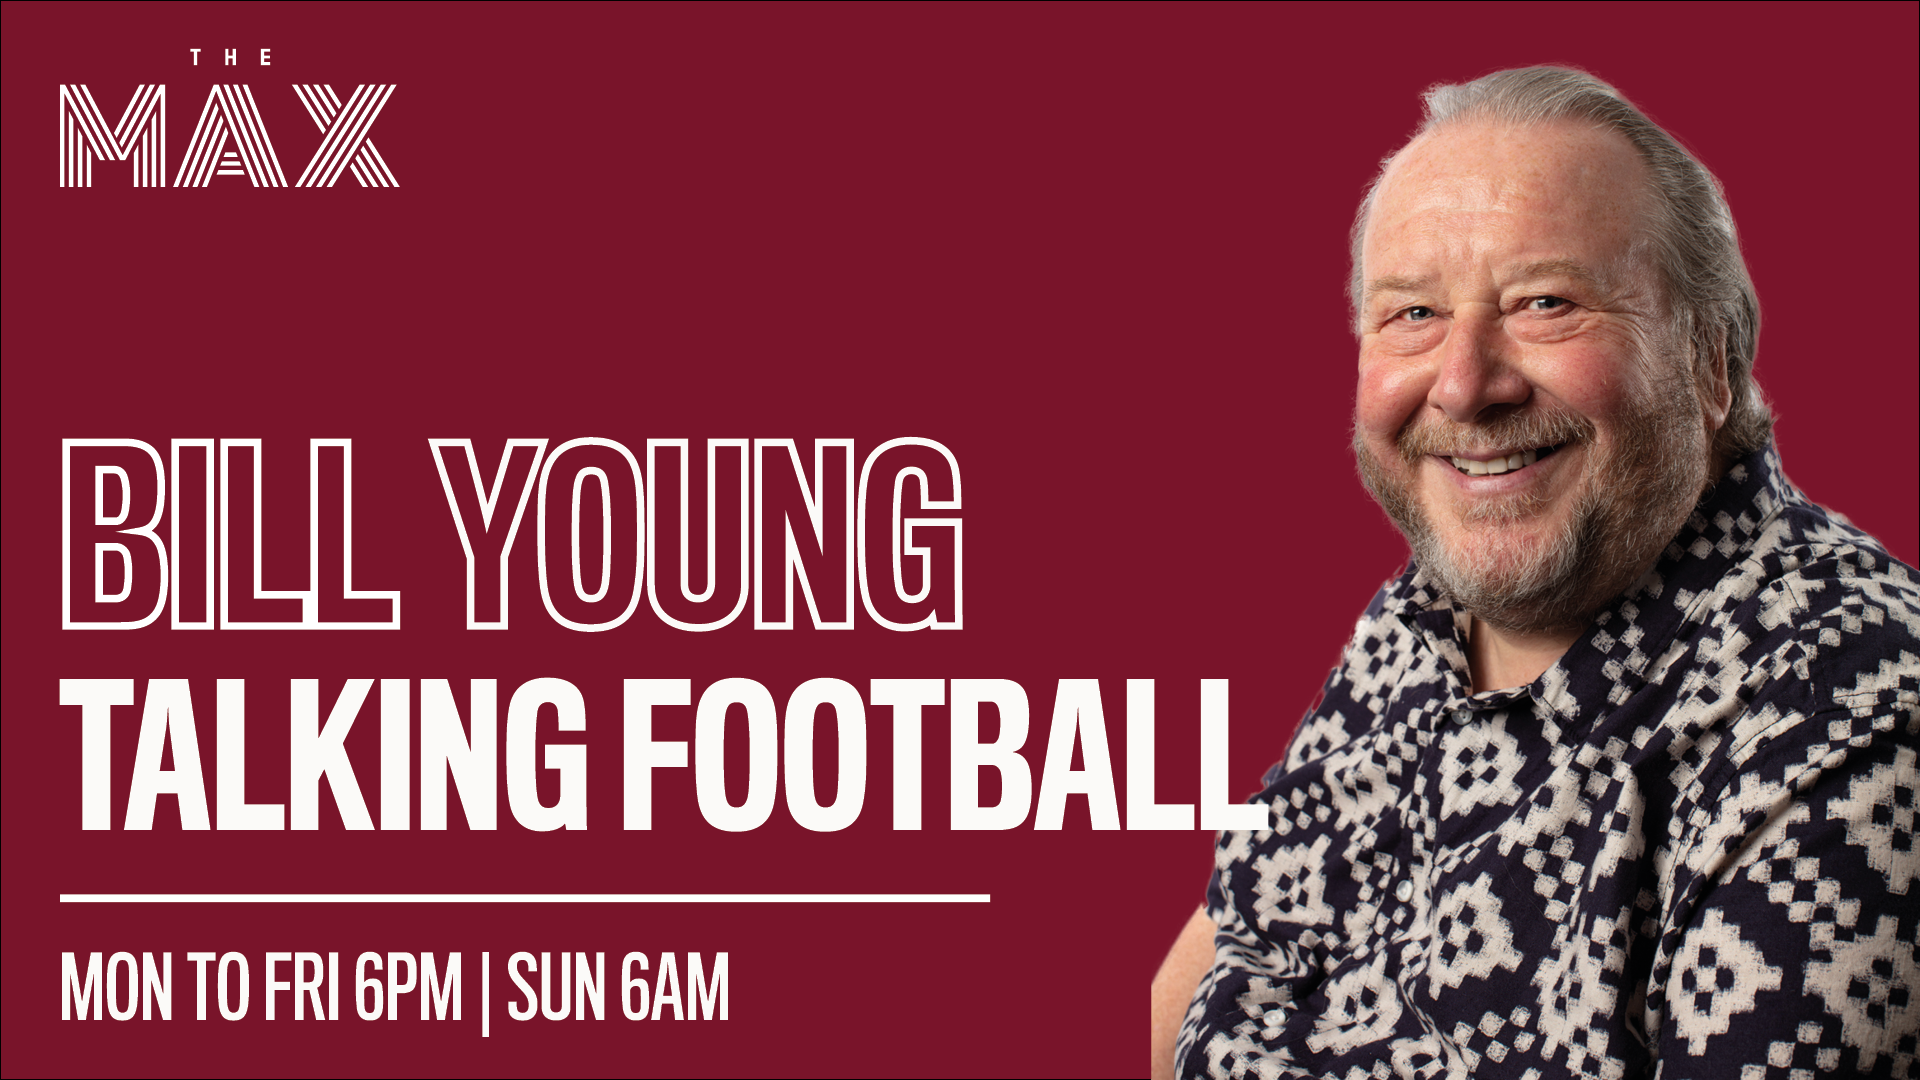 Talking Football with Bill Young - Monday 19th April